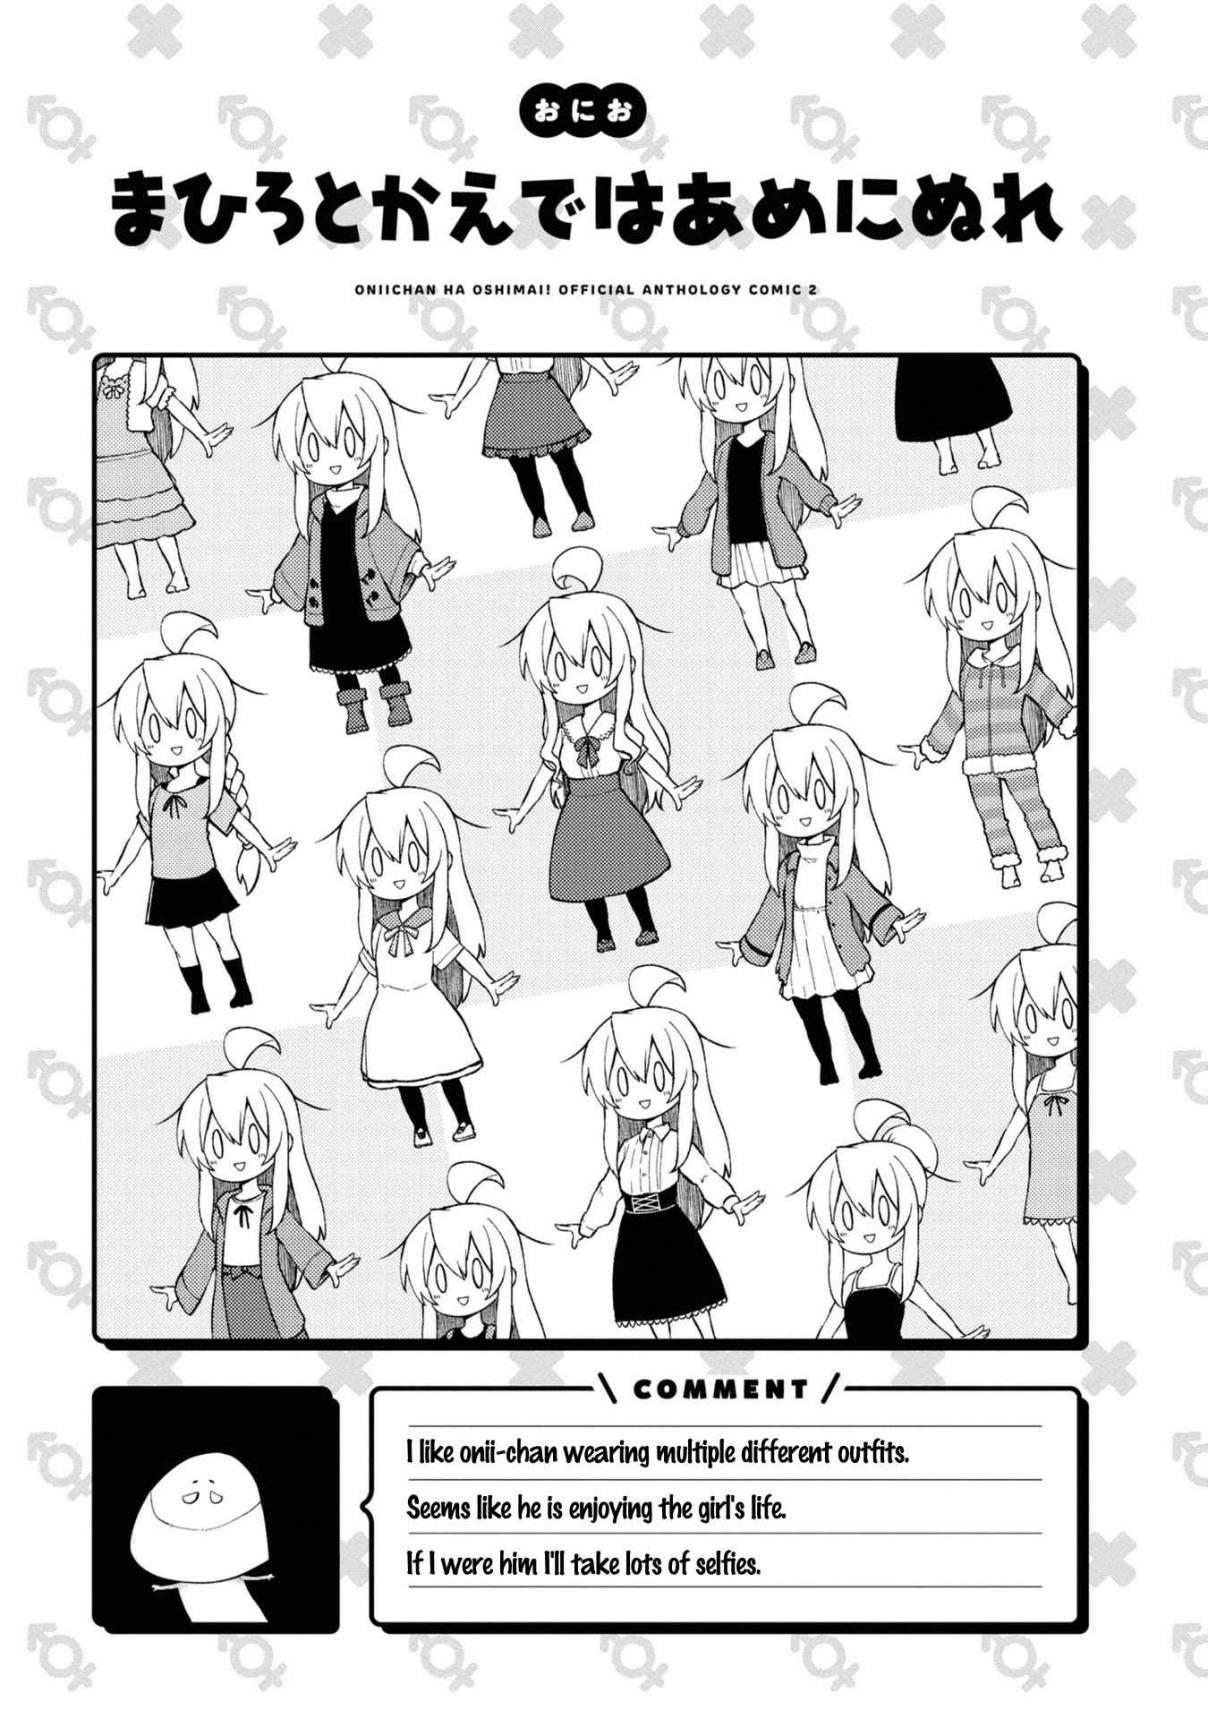 Onii-chan is Done For! Official Anthology Comic 23